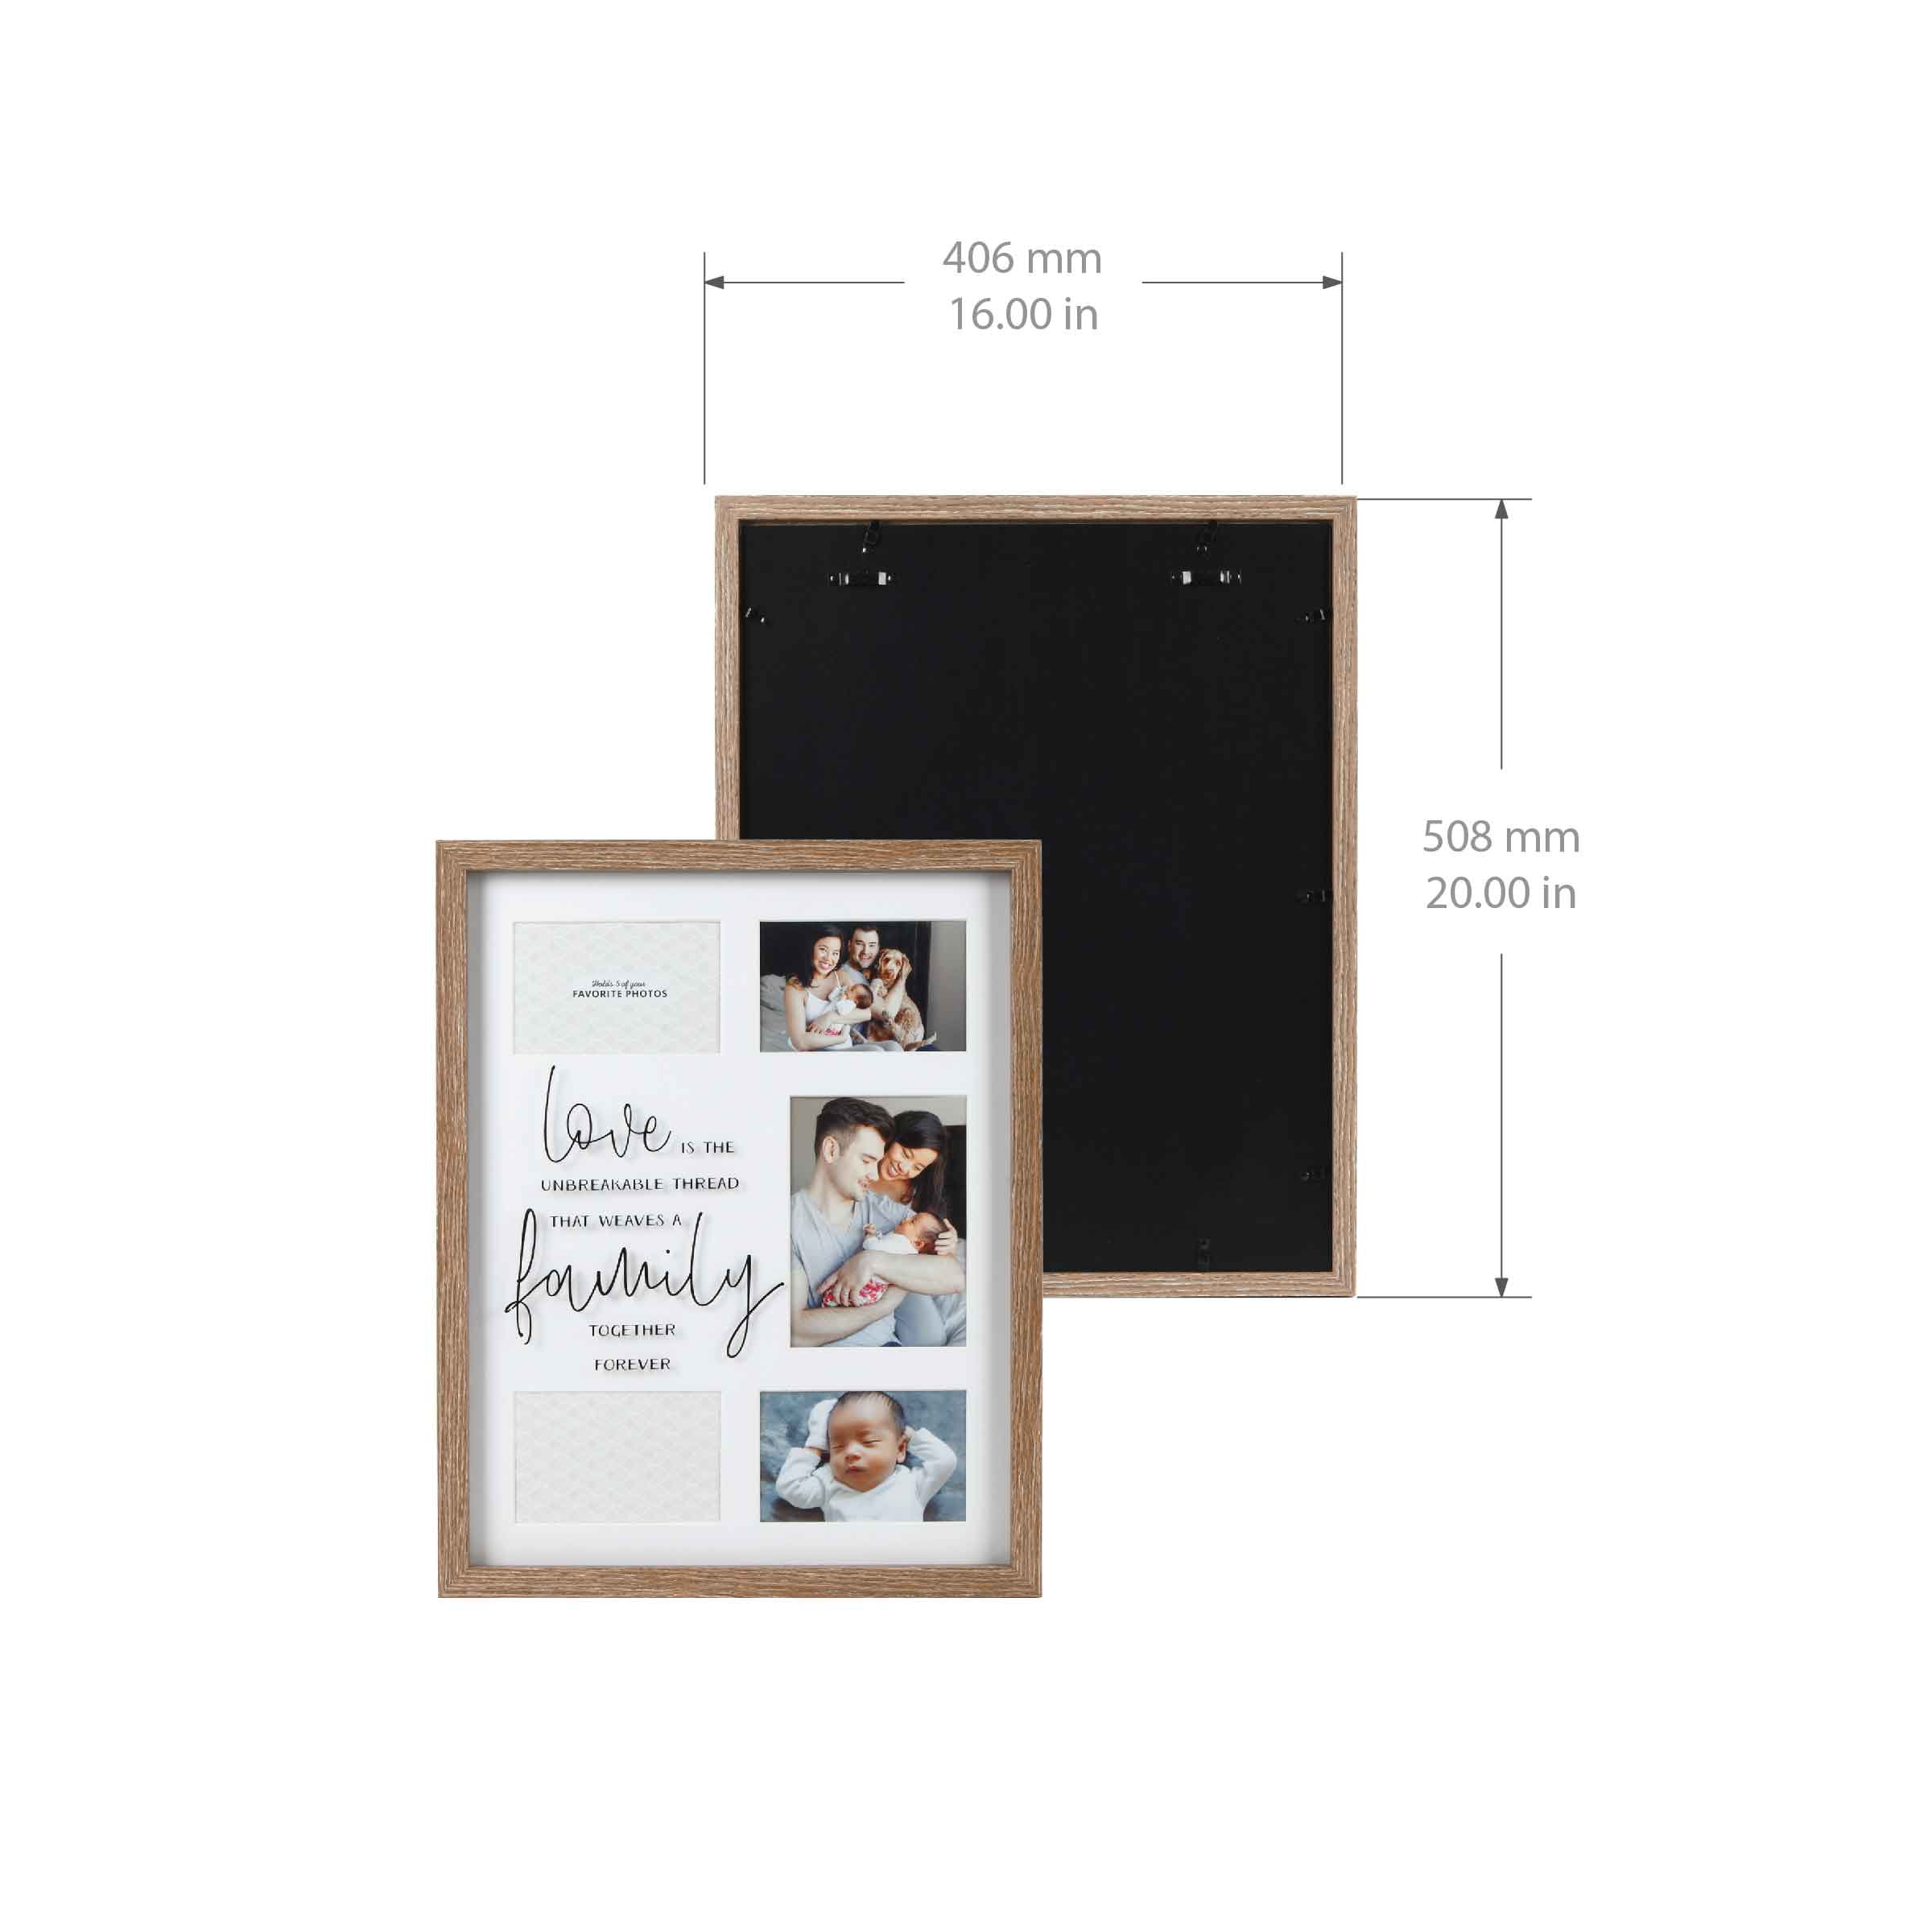 Phi Mu 16x20 Collage photo frame for 4x6 and 5x7 wall mount